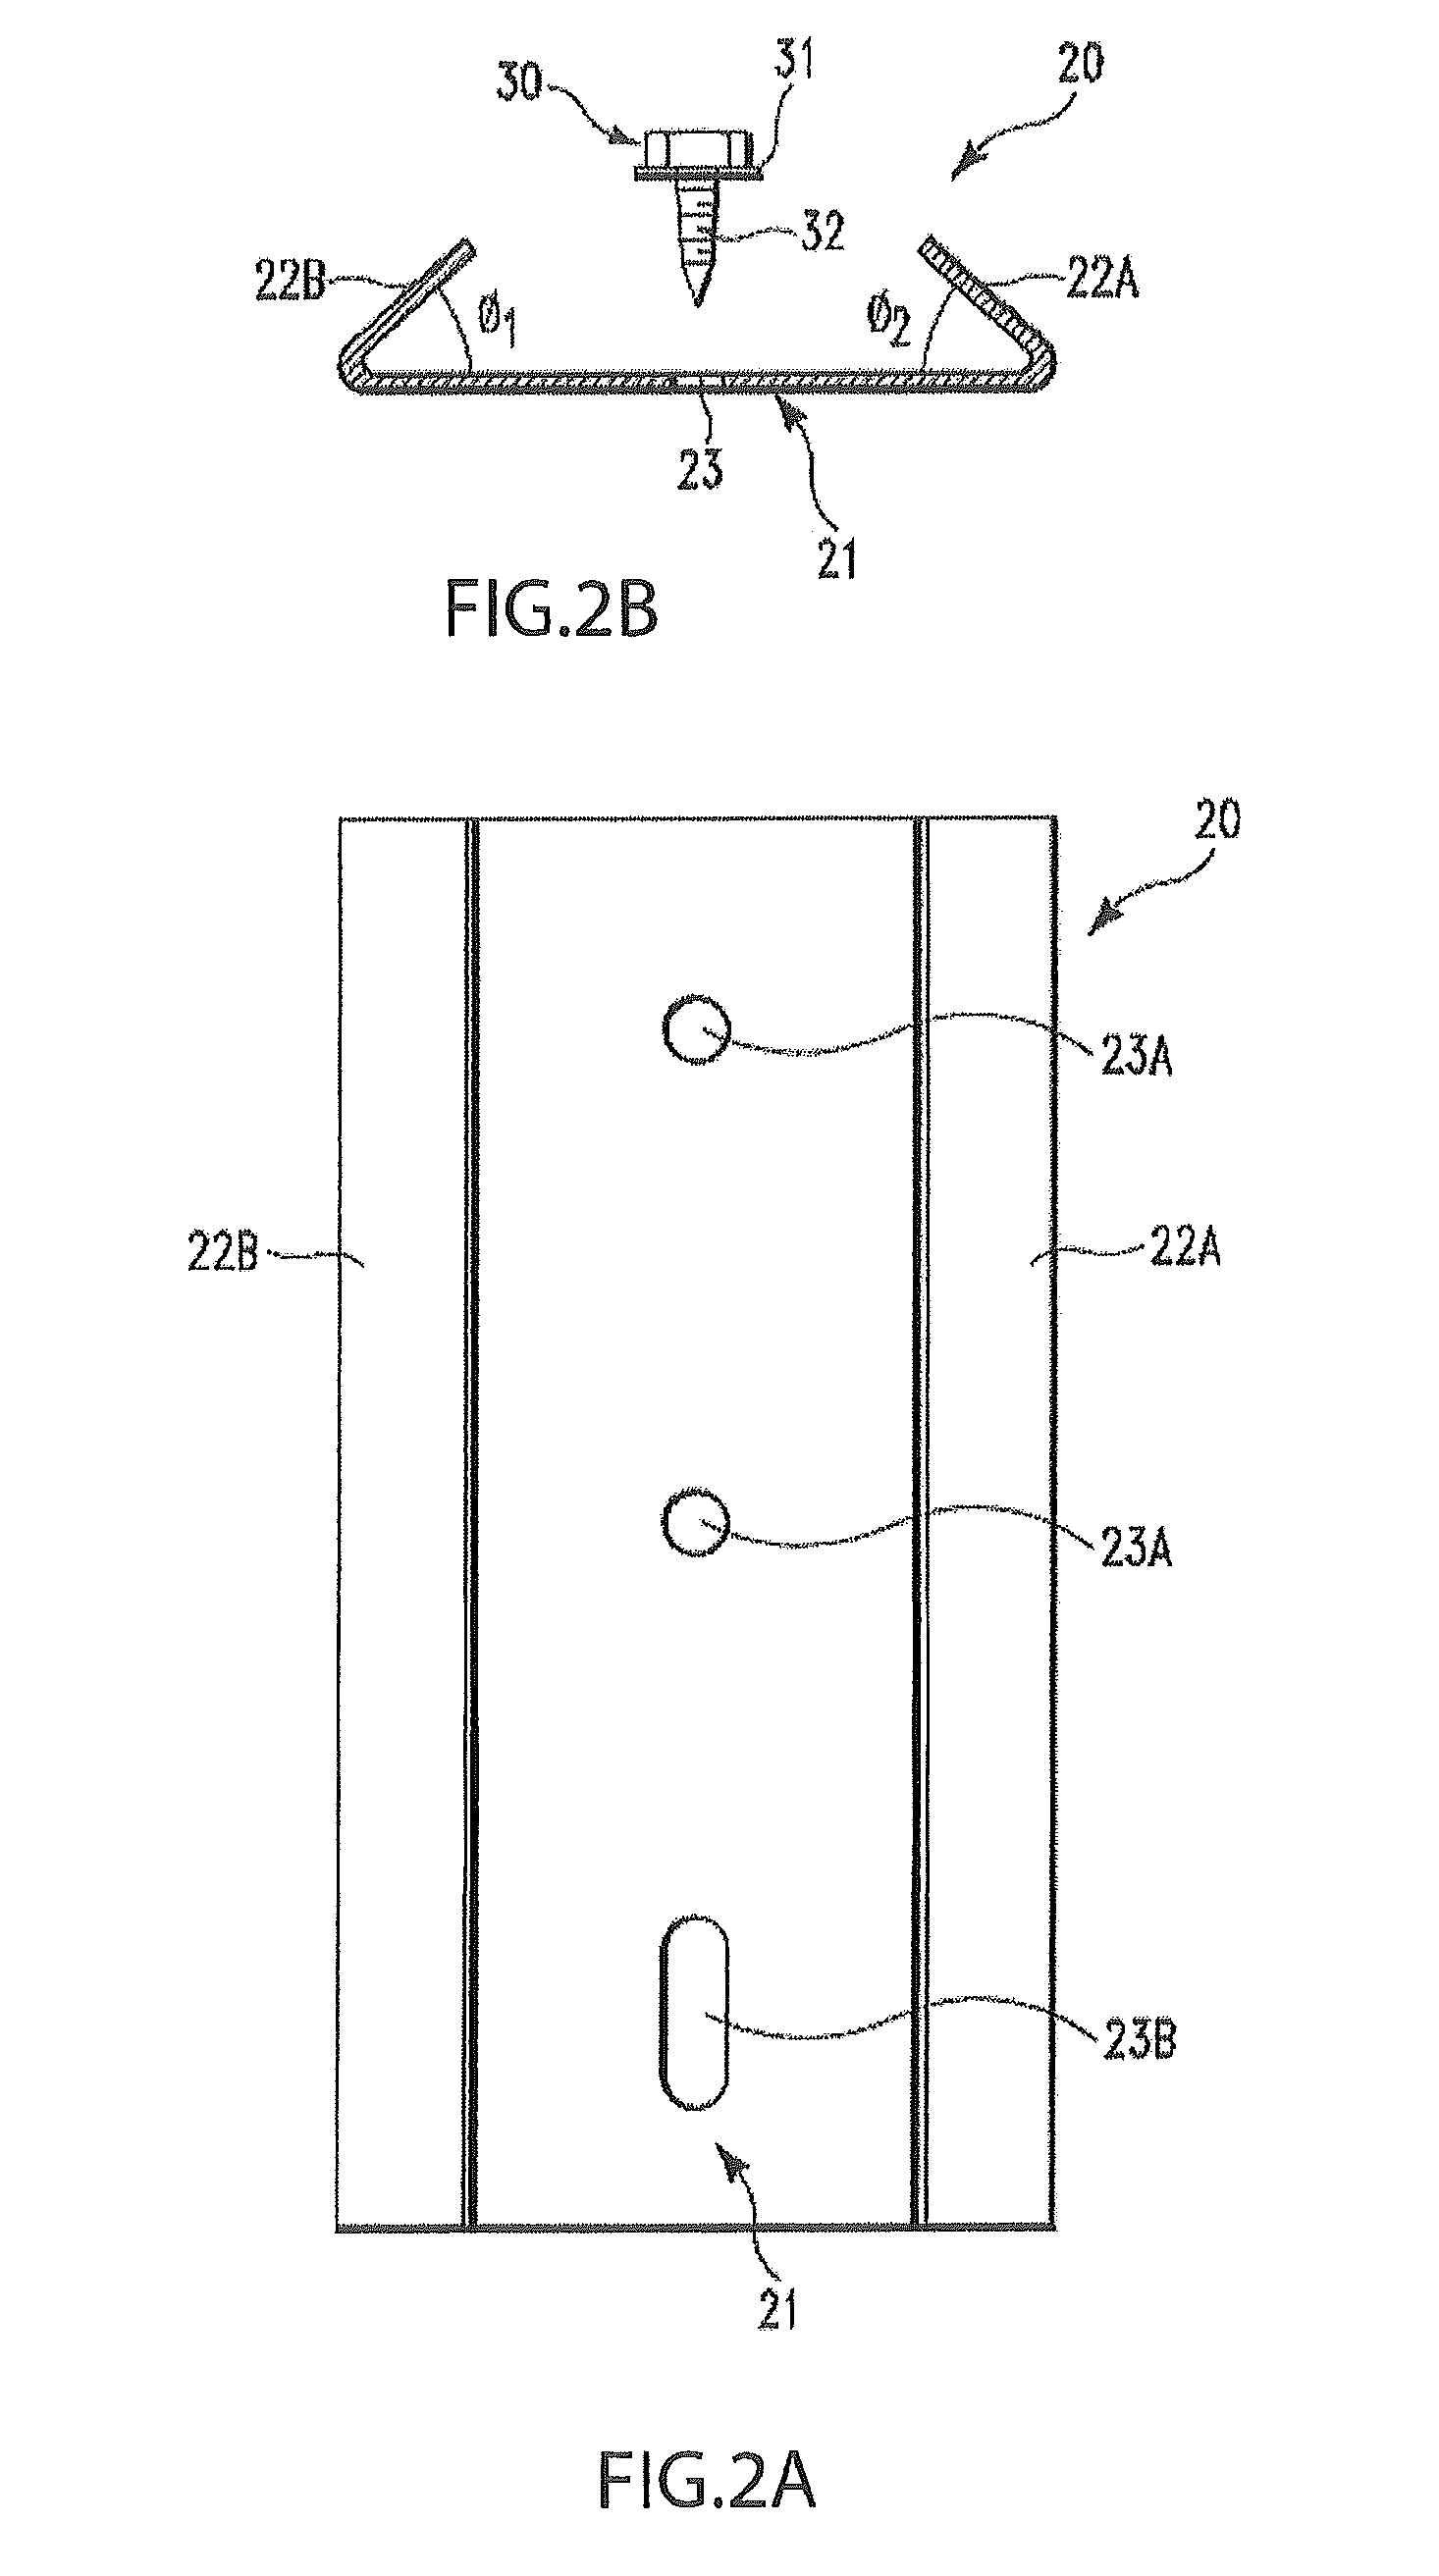 Stacking masonry block system with transition block and utility groove running therethrough